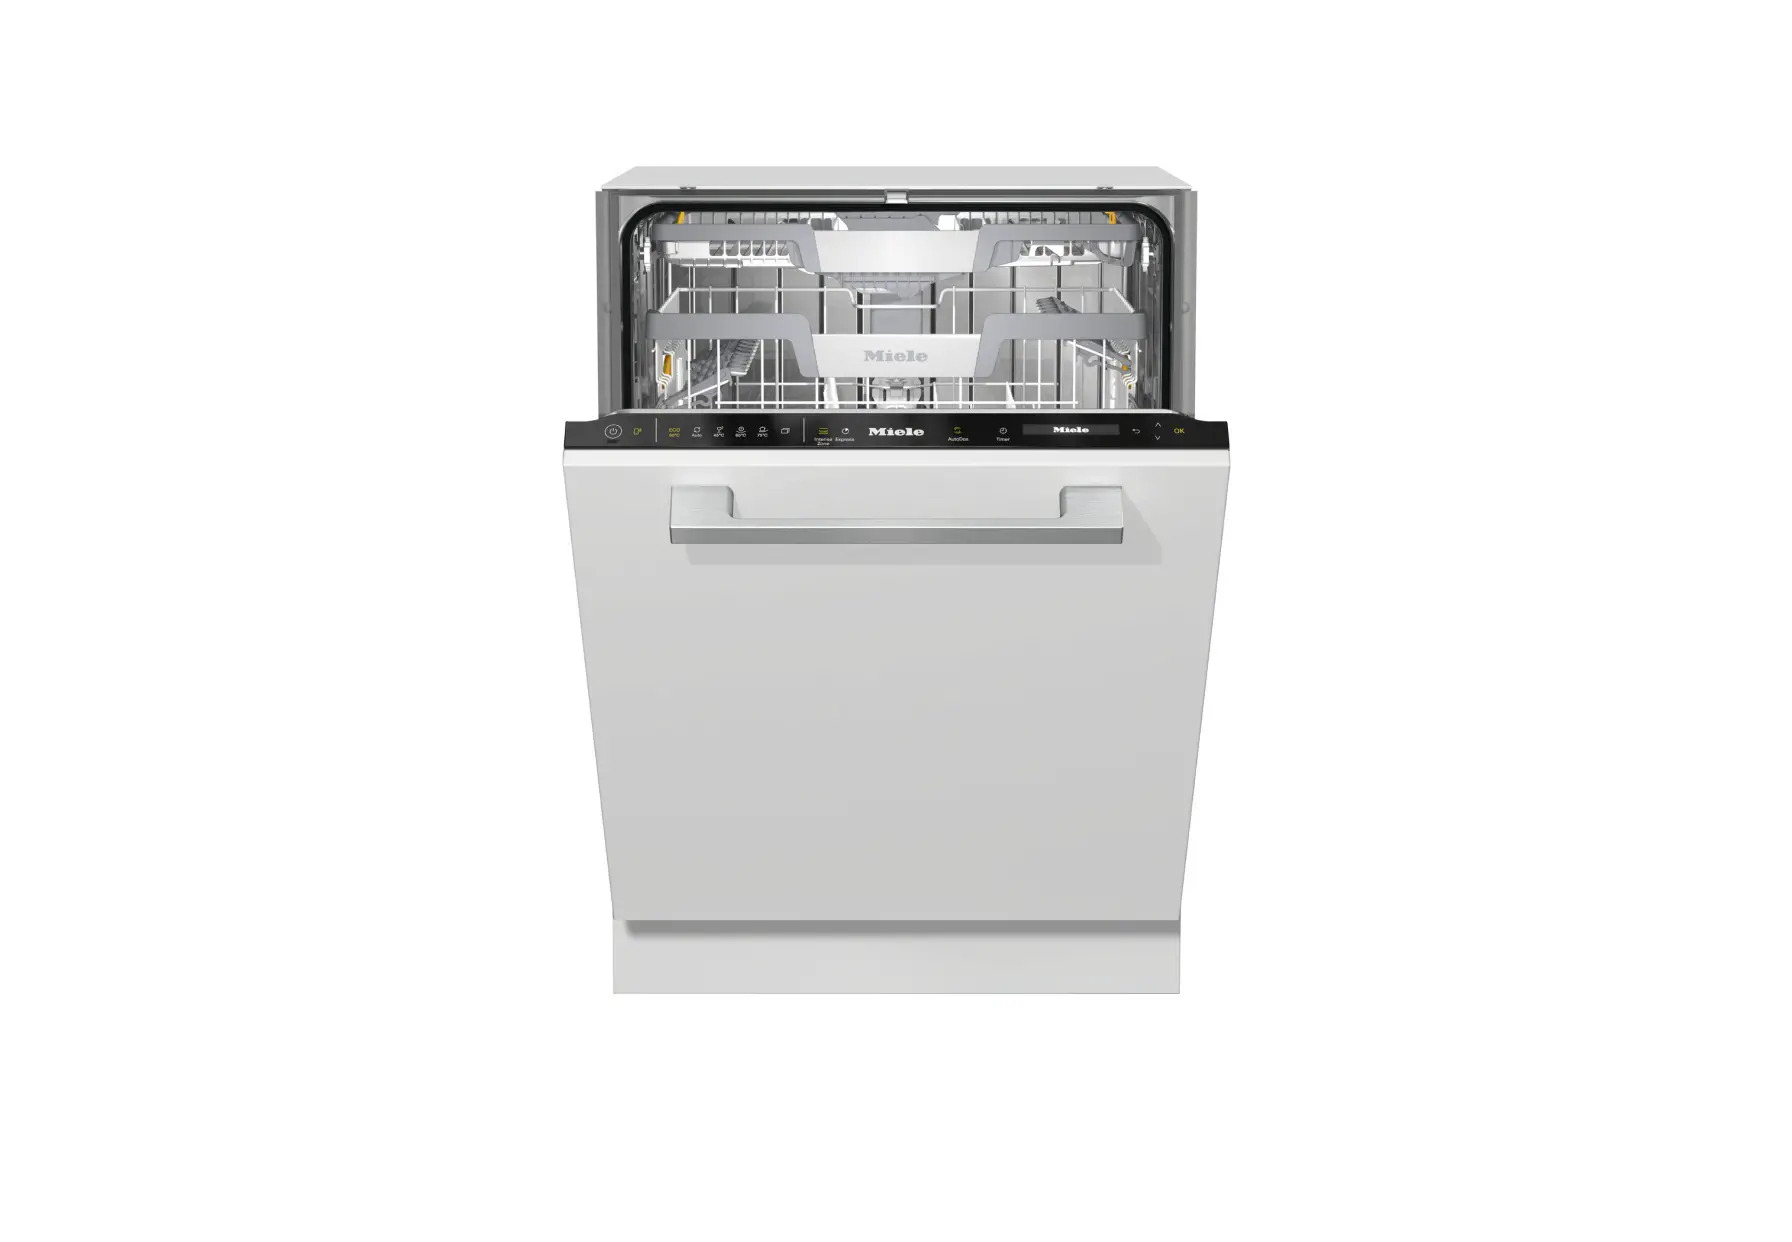 G7369S AutoDos fully integrated dishwasher